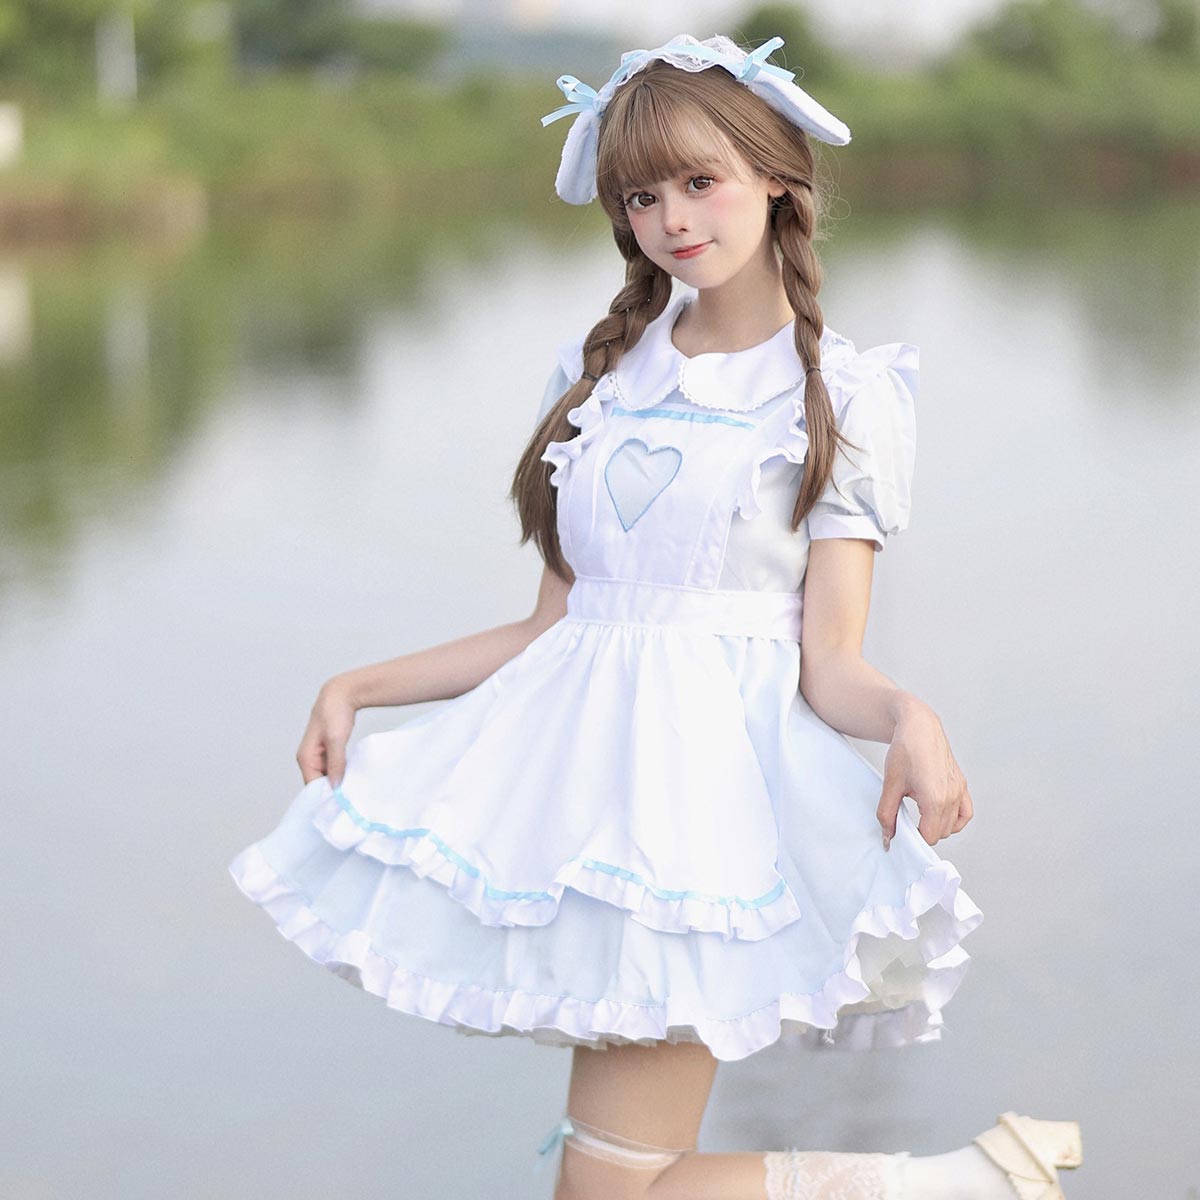 Blue Puff Sleeve Lolita Dress With Ruffles Apron And Headpieces